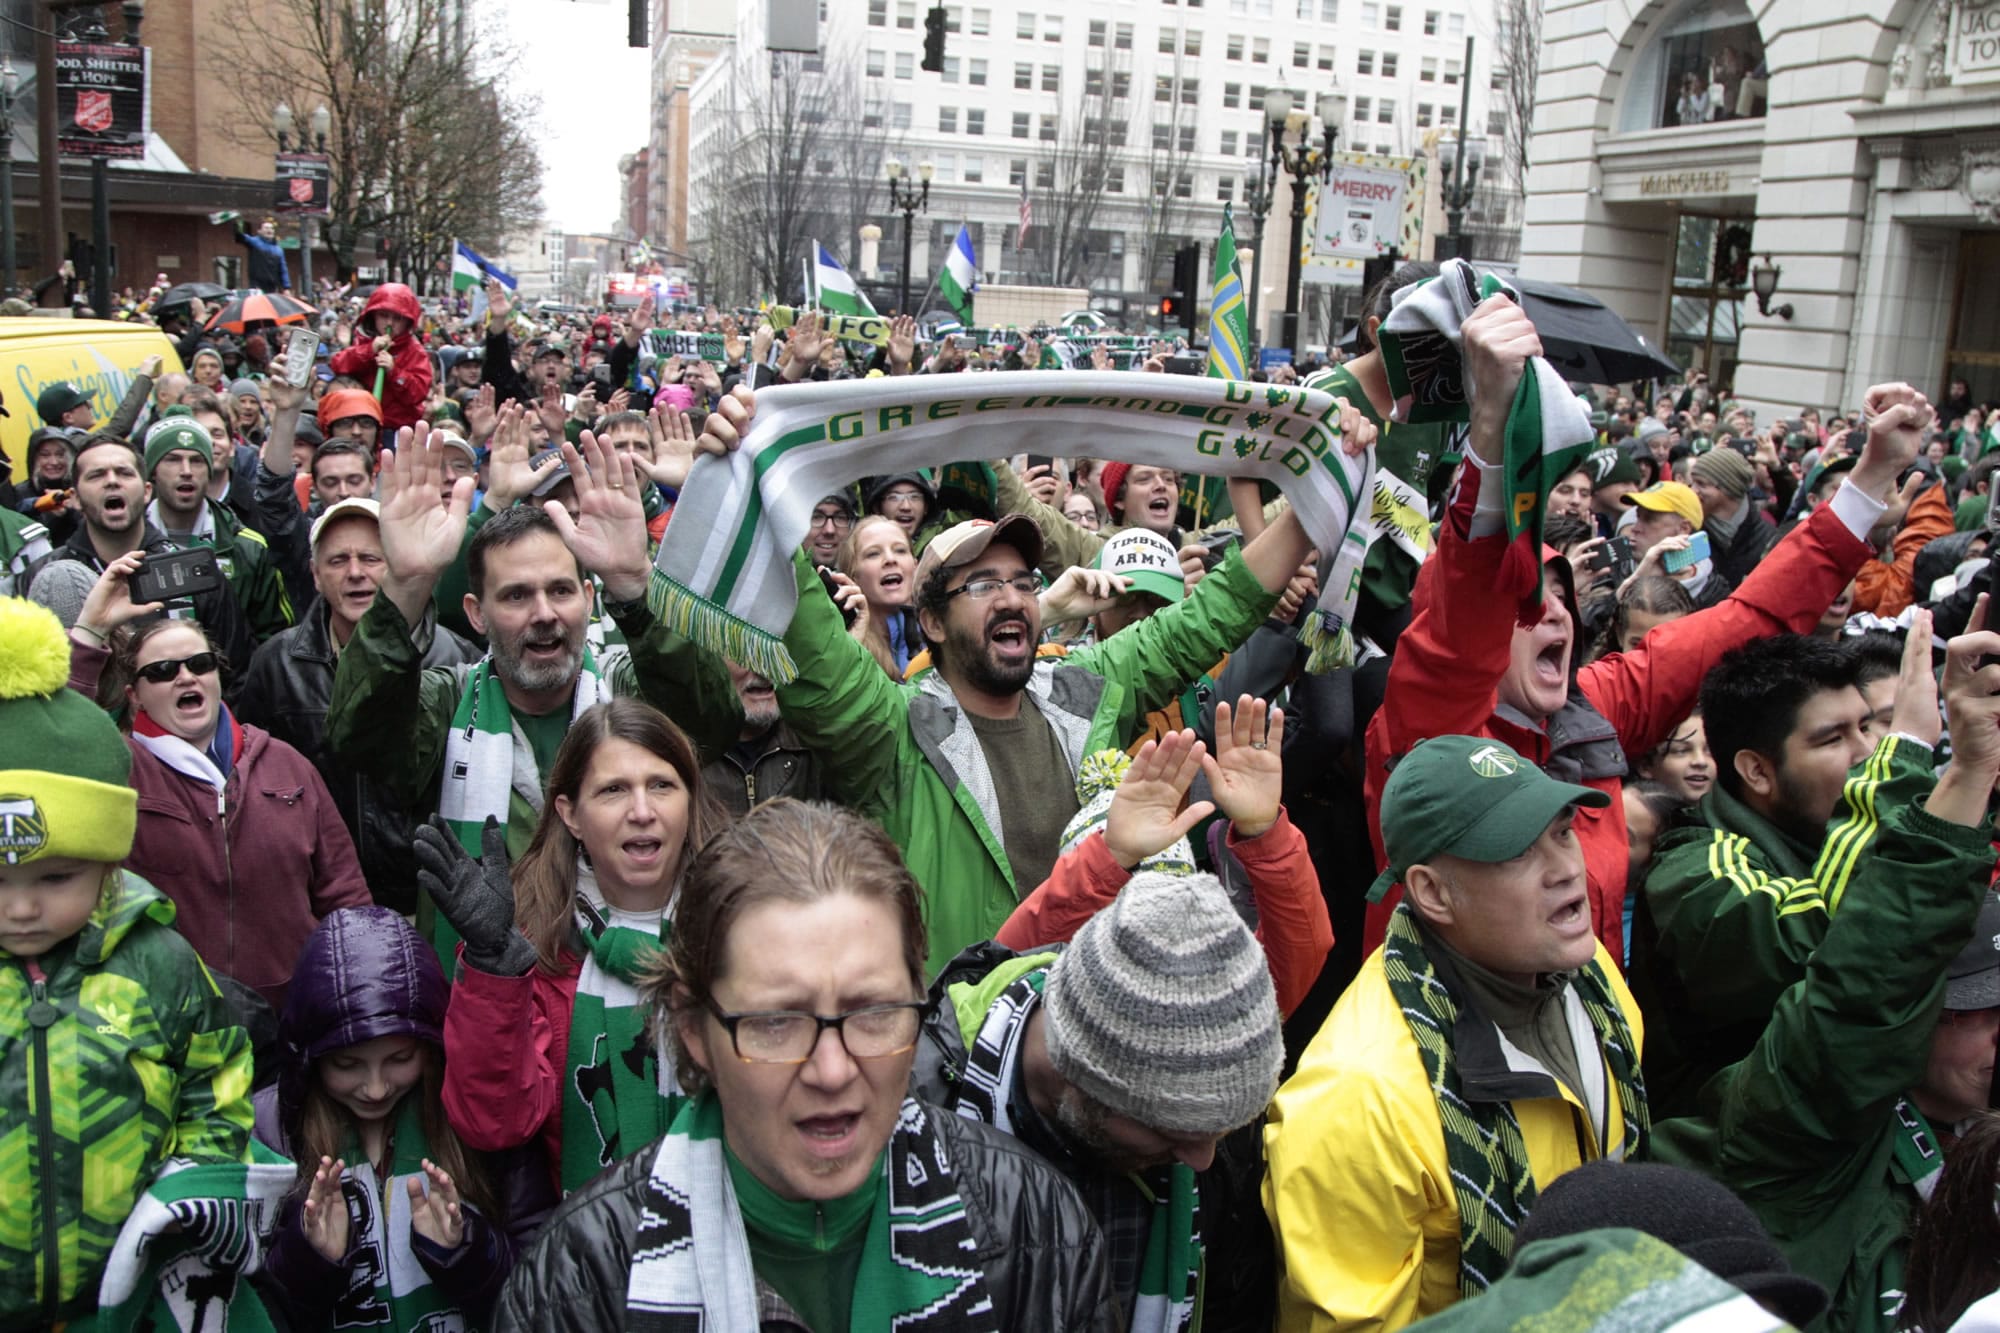 Fans cheer during the MLS champion Portland Timbers parade through Portland, Ore., Tuesday, Dec. 8, 2015.  The Timbers defeated the Columbus Crew 2-1 Sunday in the MLS Cup soccer final.